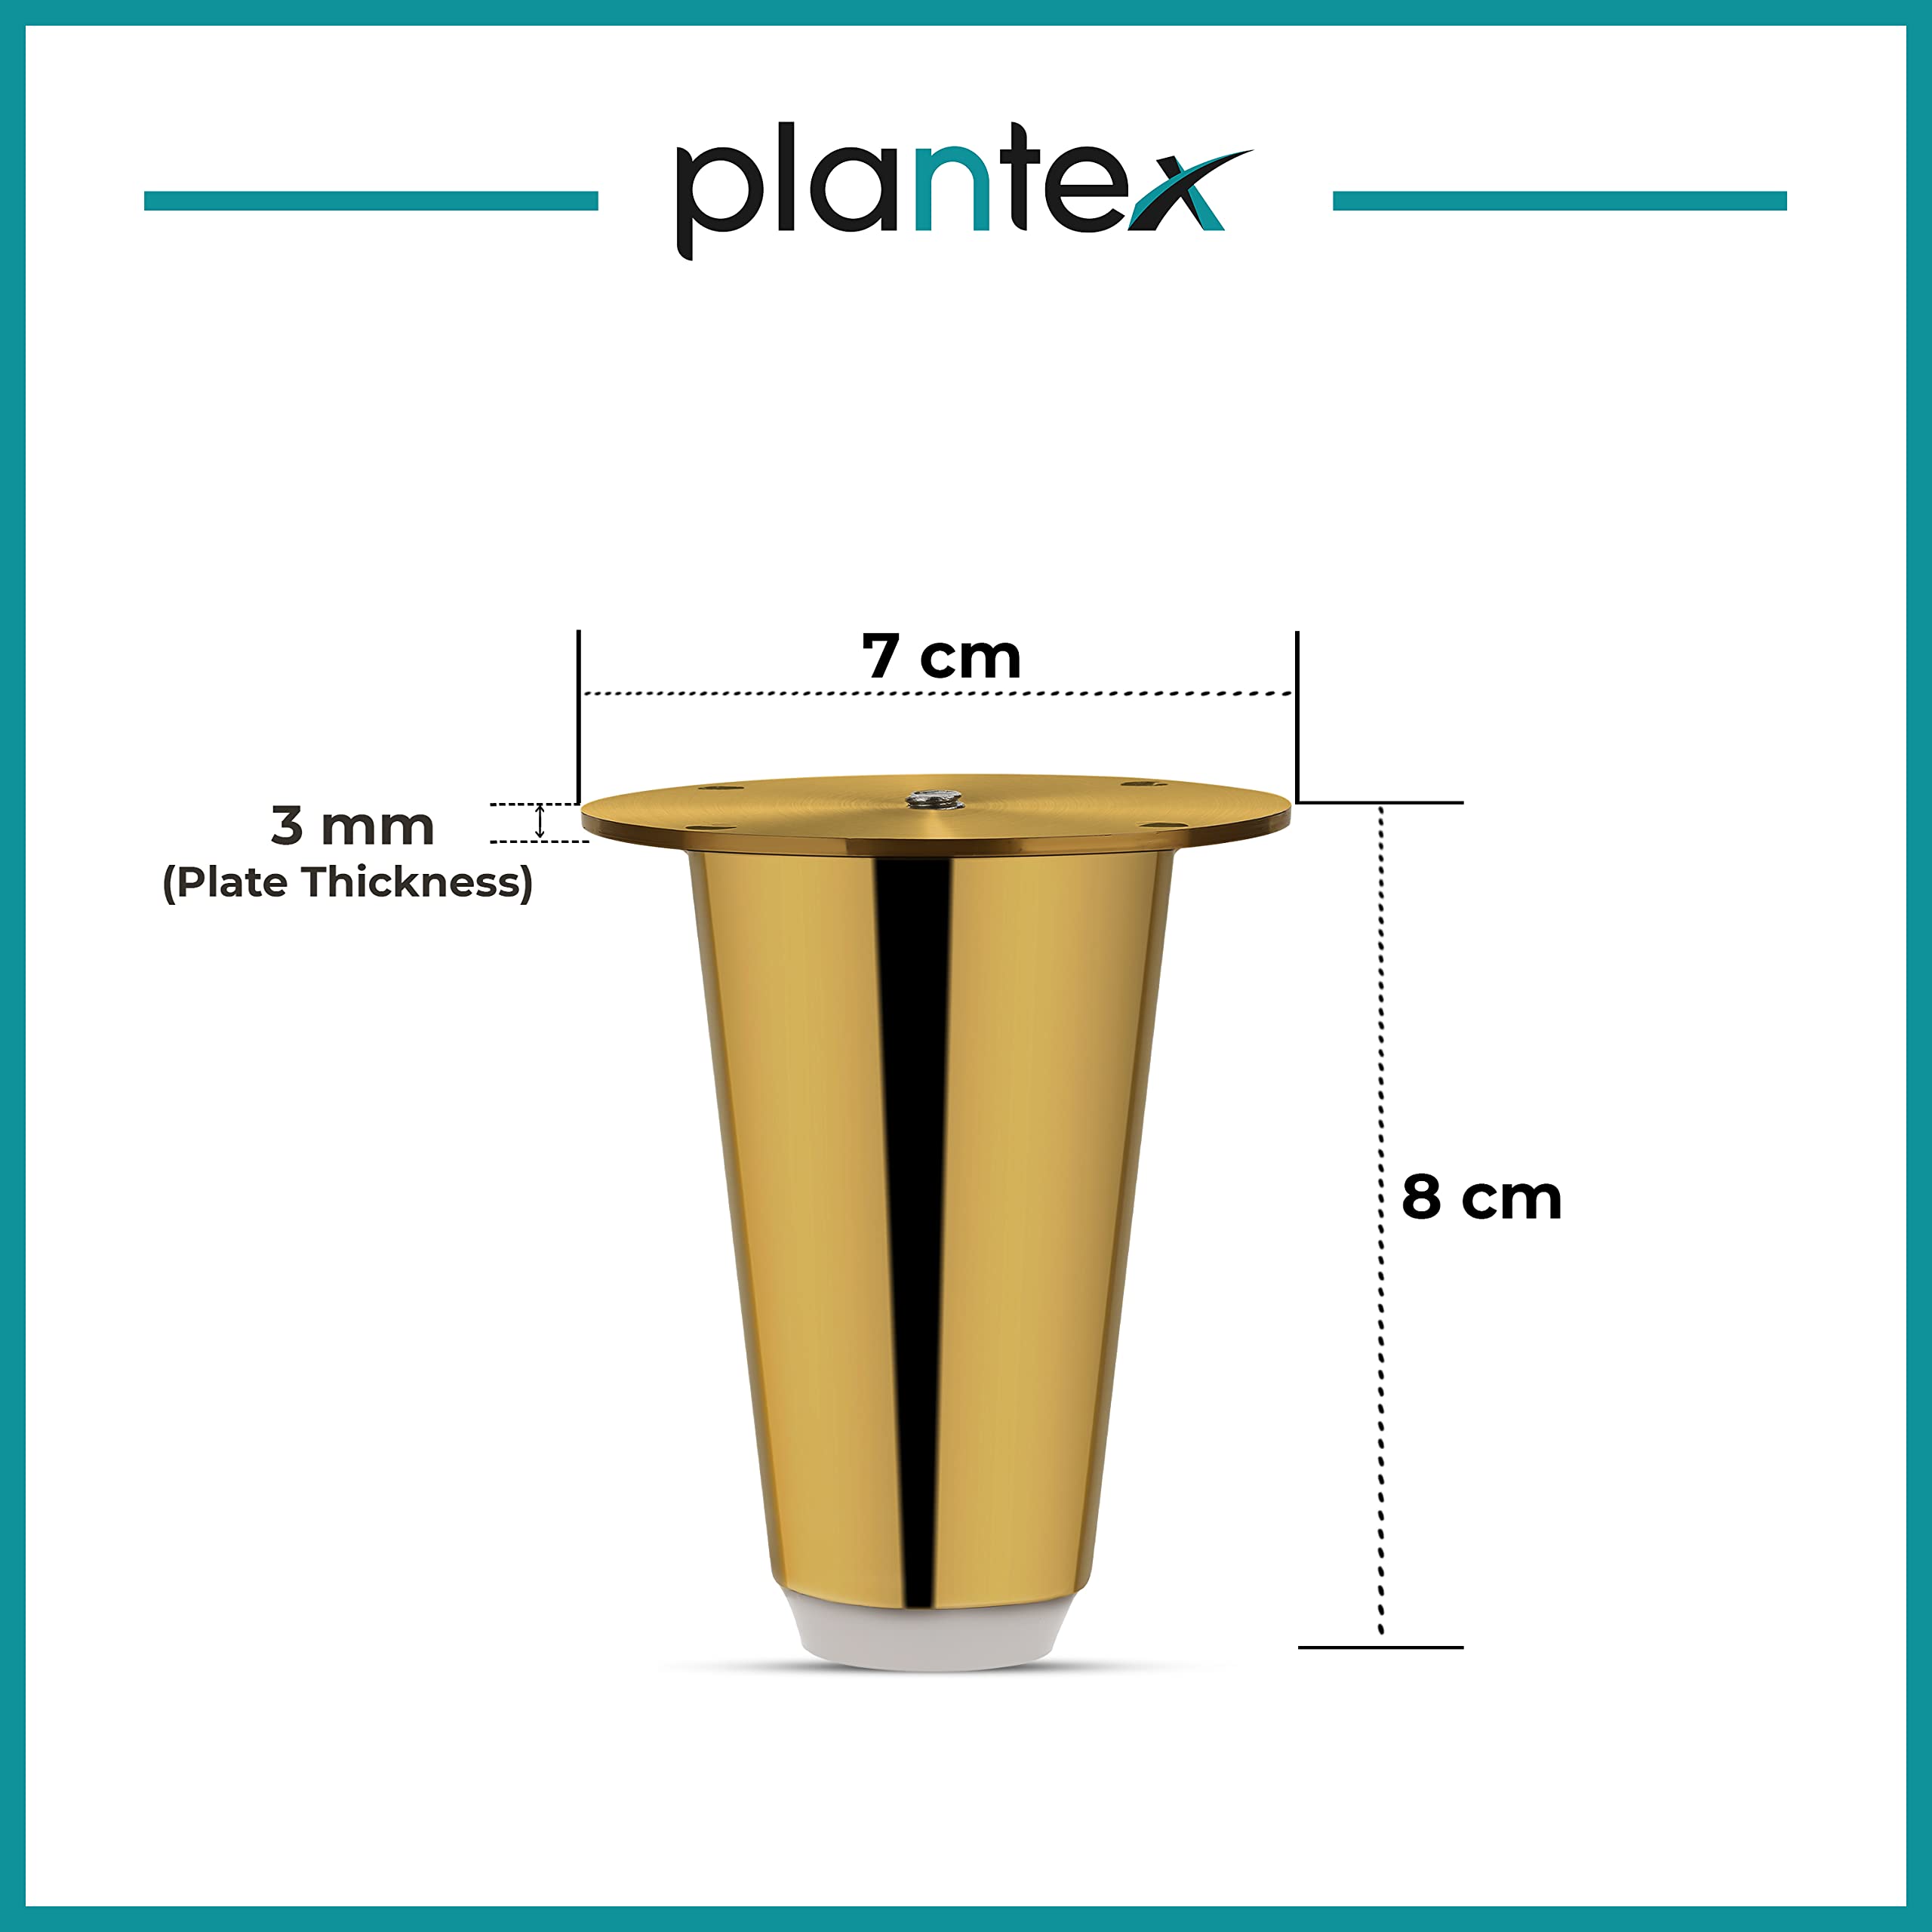 Plantex Heavy Duty Stainless Steel 3 inch Sofa Leg/Bed Furniture Leg Pair for Home Furnitures (DTS-53, Gold) – 4 Pcs